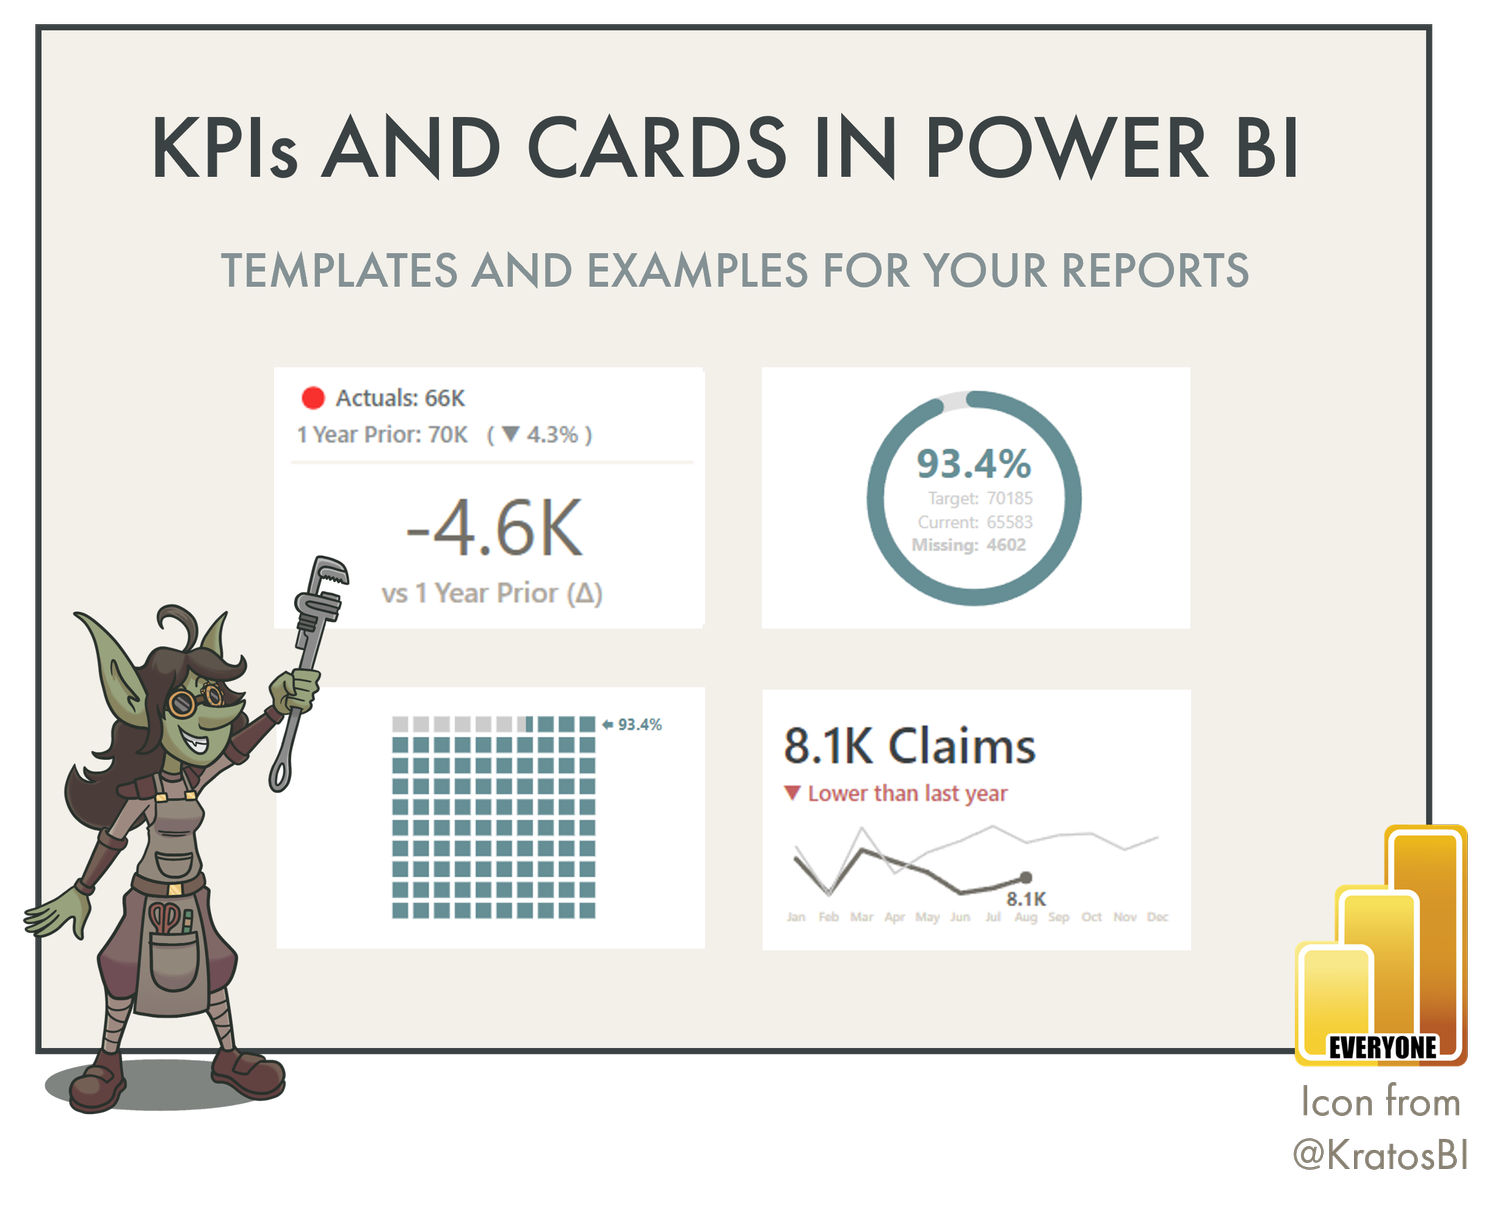 KPIs and cards in Power BI